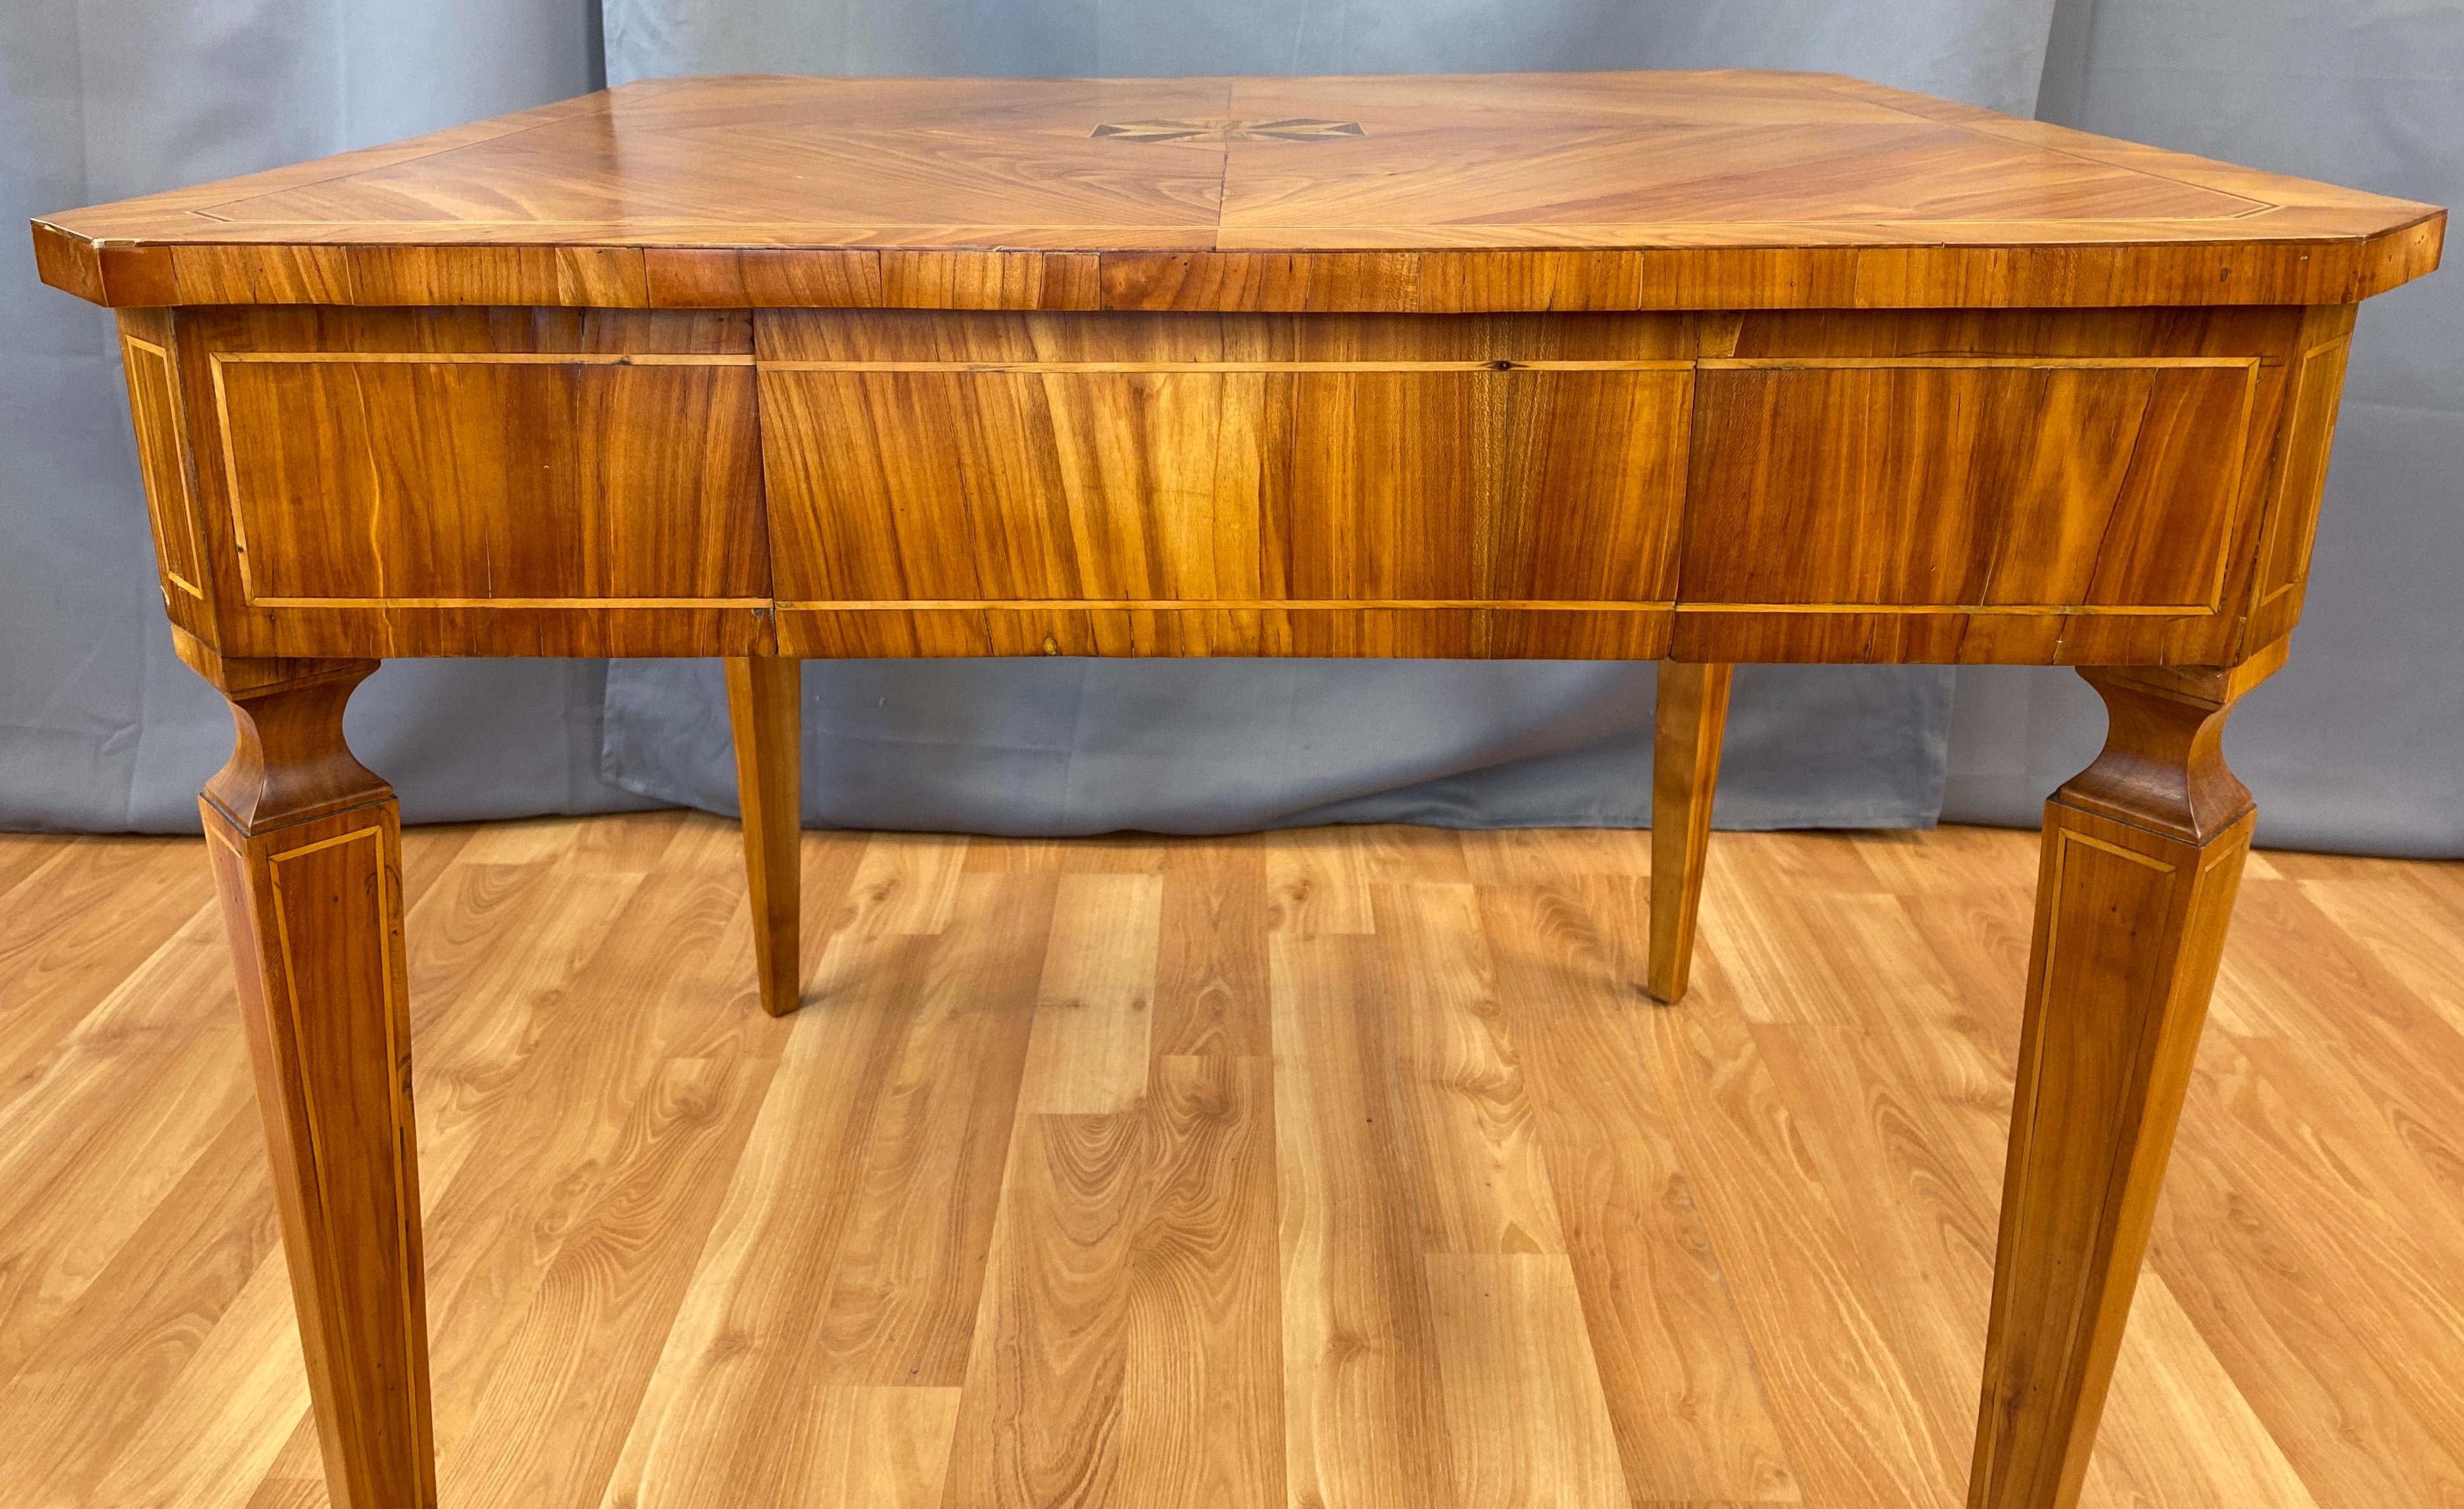 18th Century Neoclassical Italian Marquetry Cherry Table For Sale 3